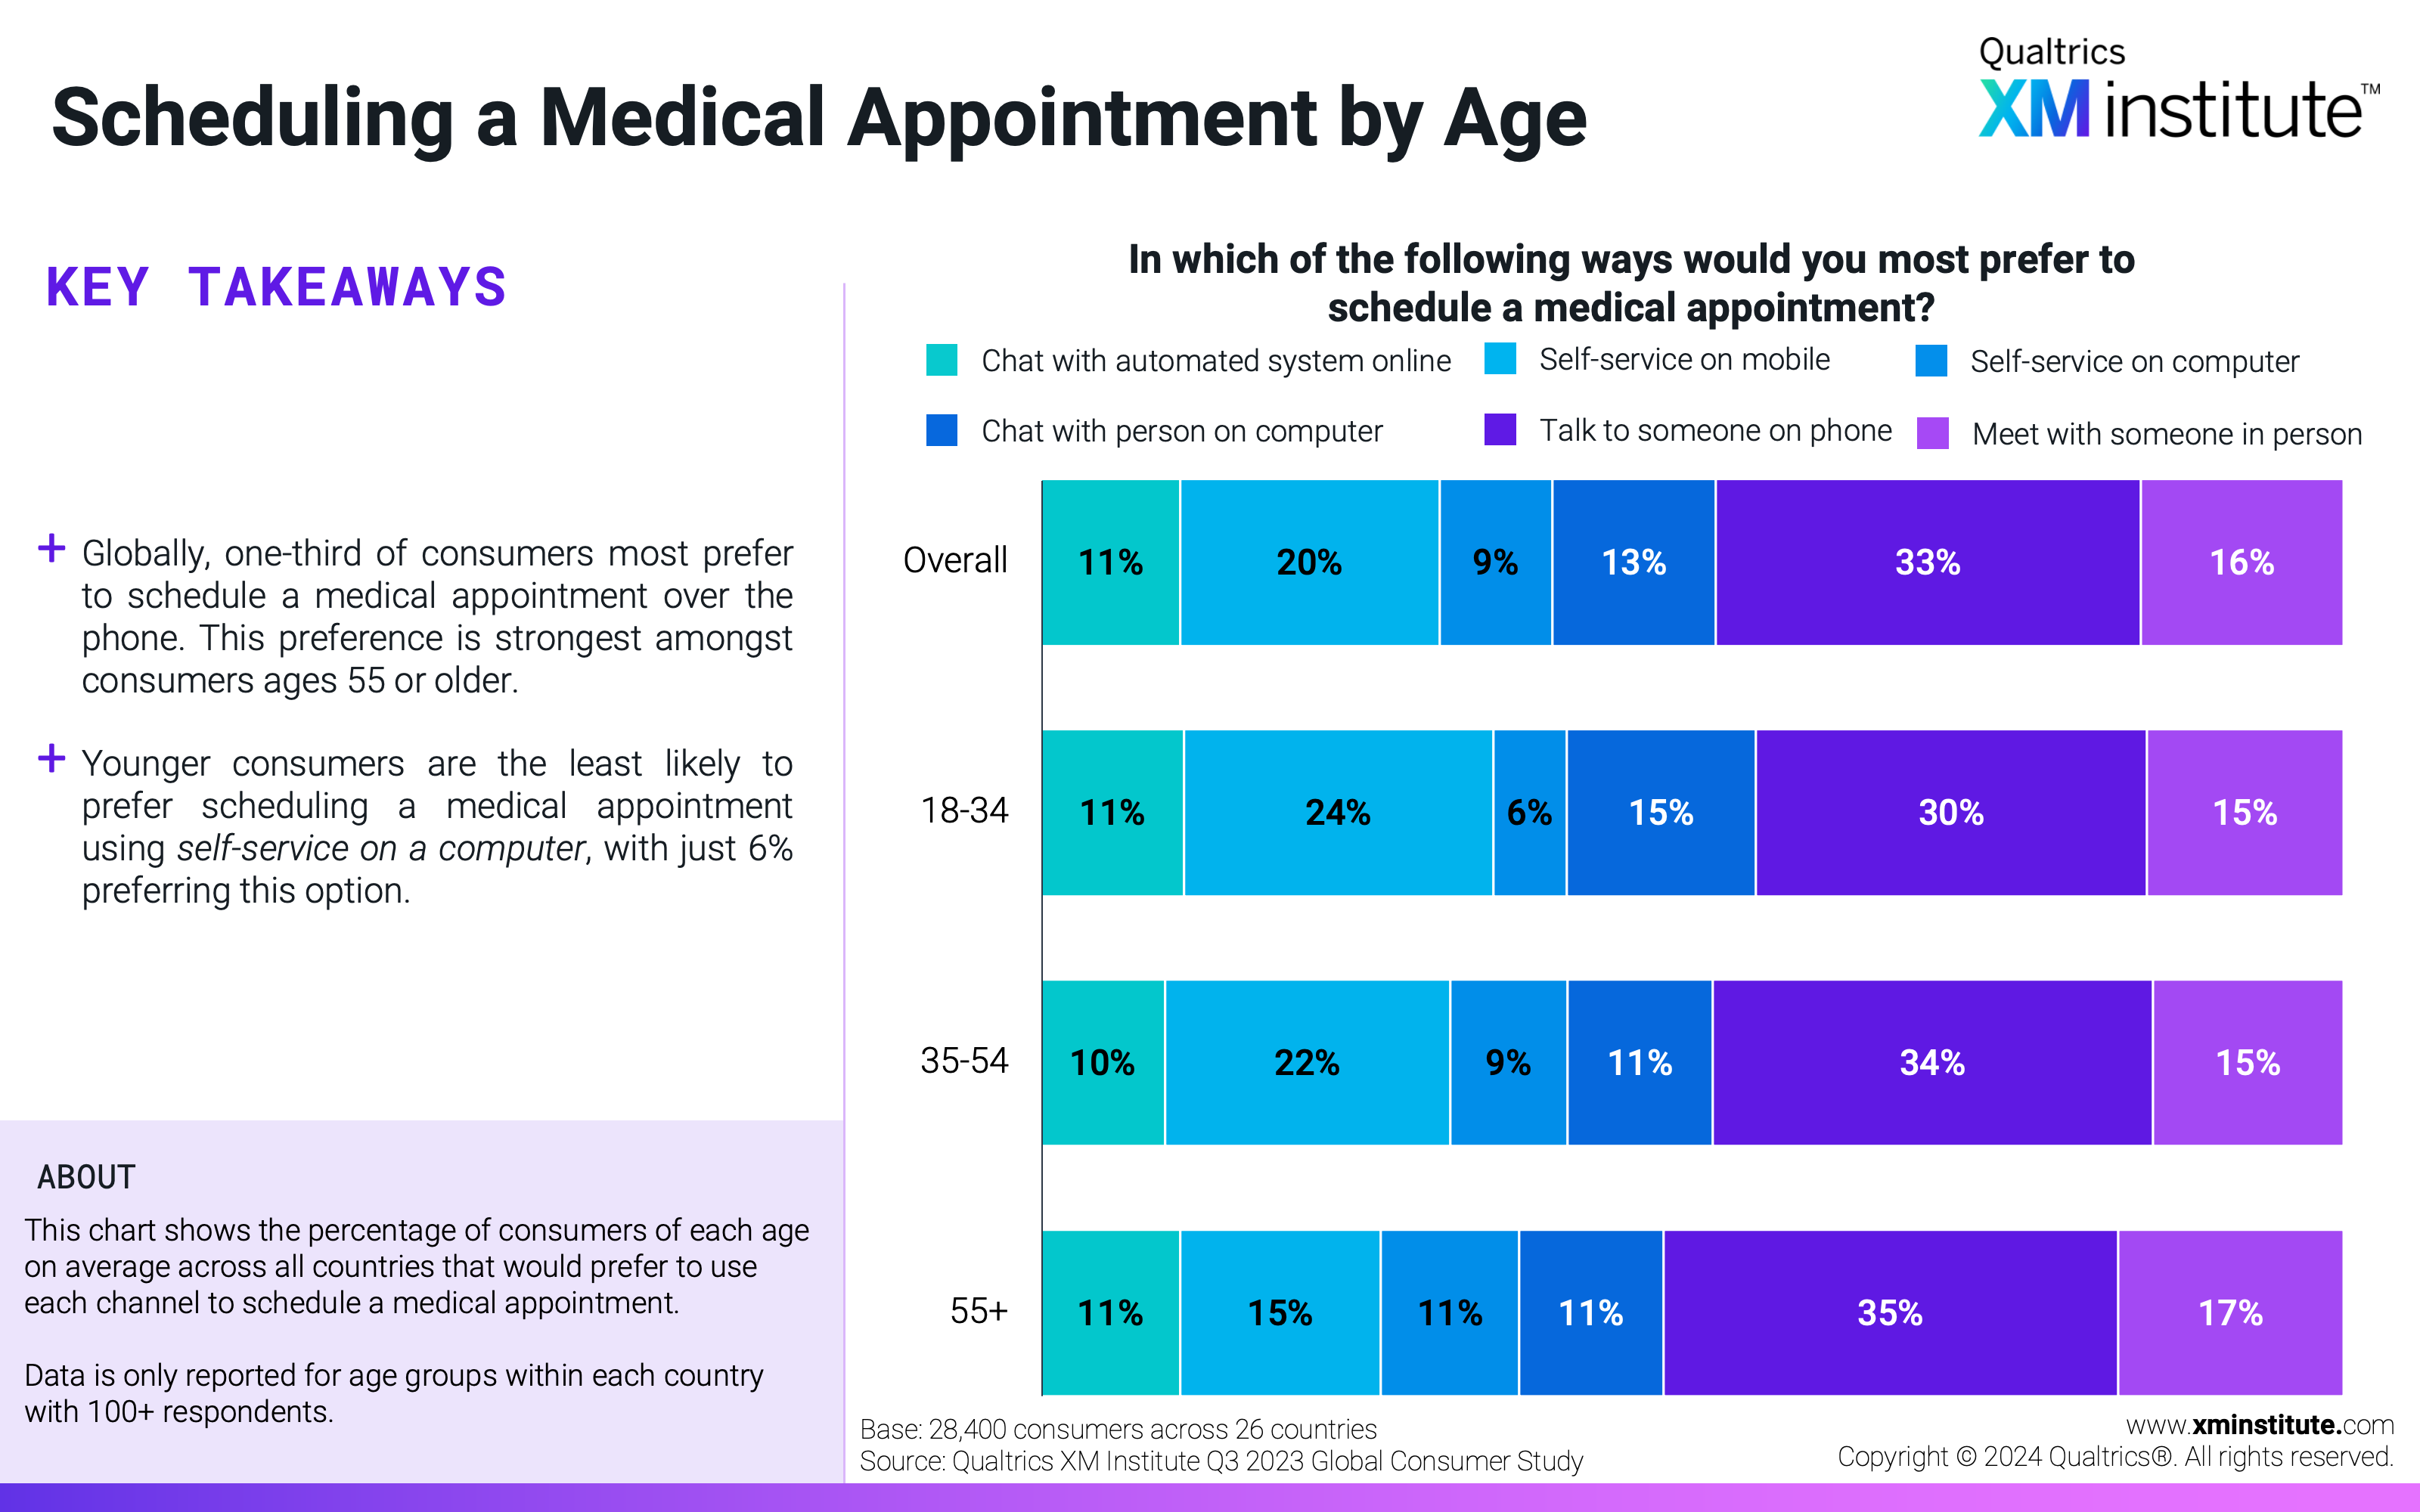 This chart shows the percentage of consumers of each age on average across all countries that would prefer to use each channel to schedule a medical appointment. 